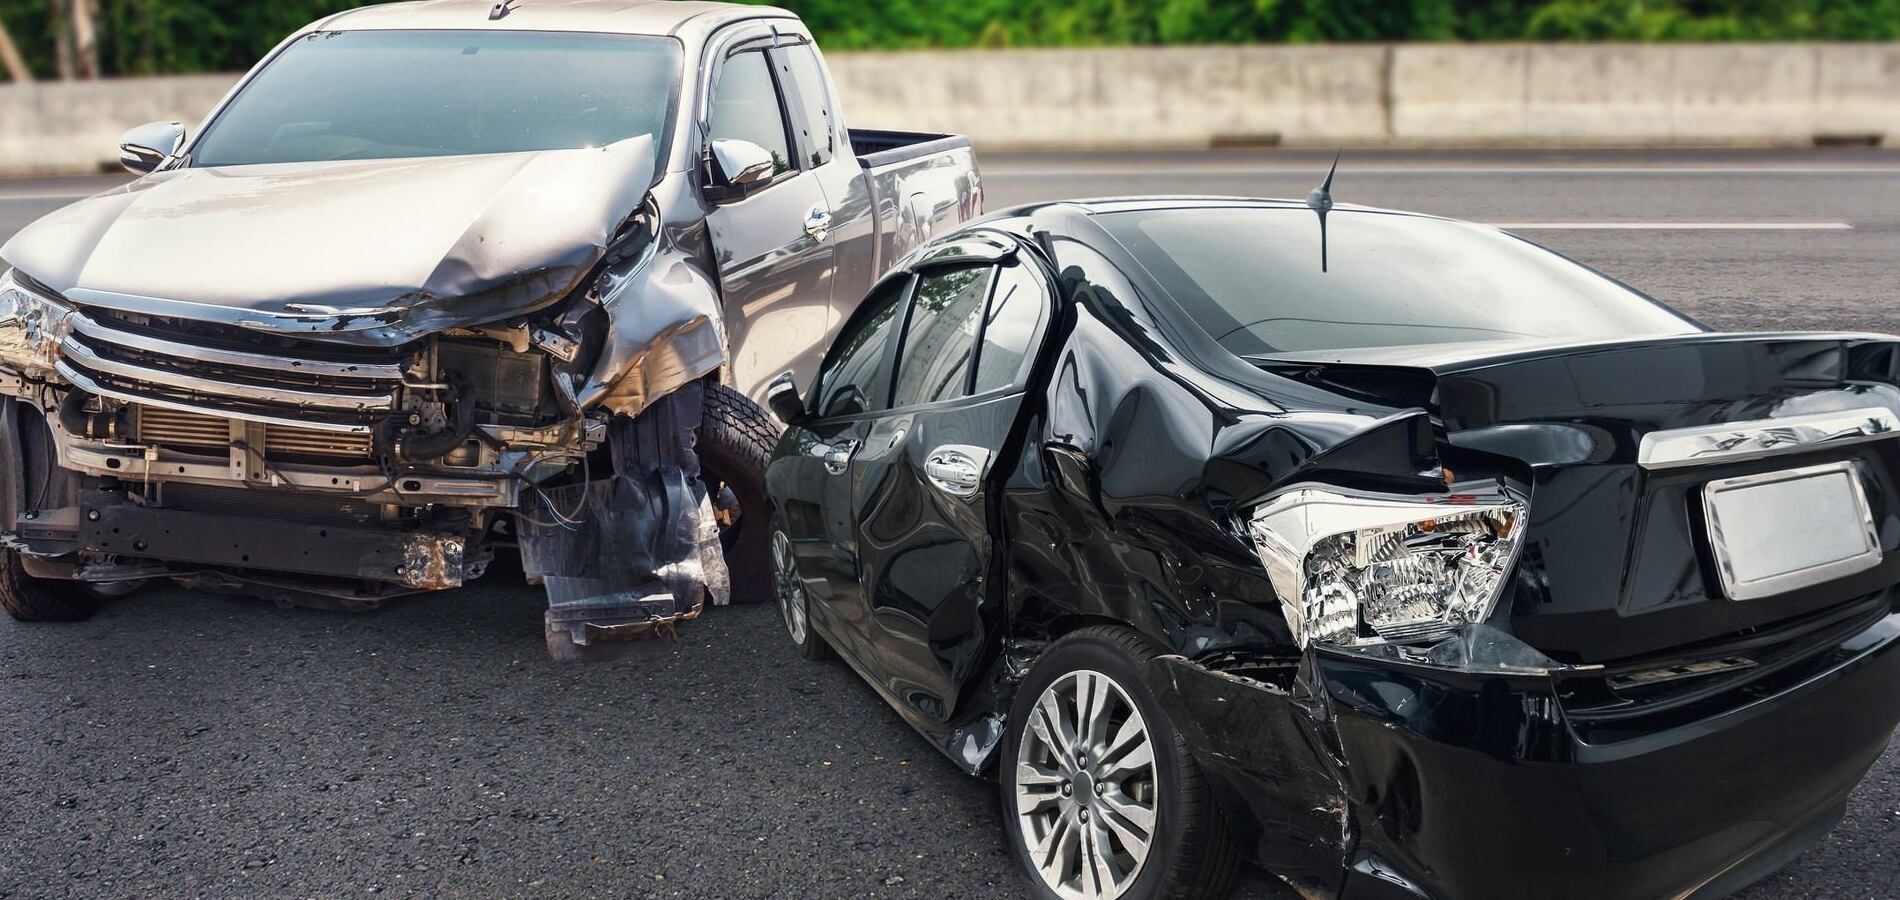 Car Accident Lawyer in Redondo Beach, CA